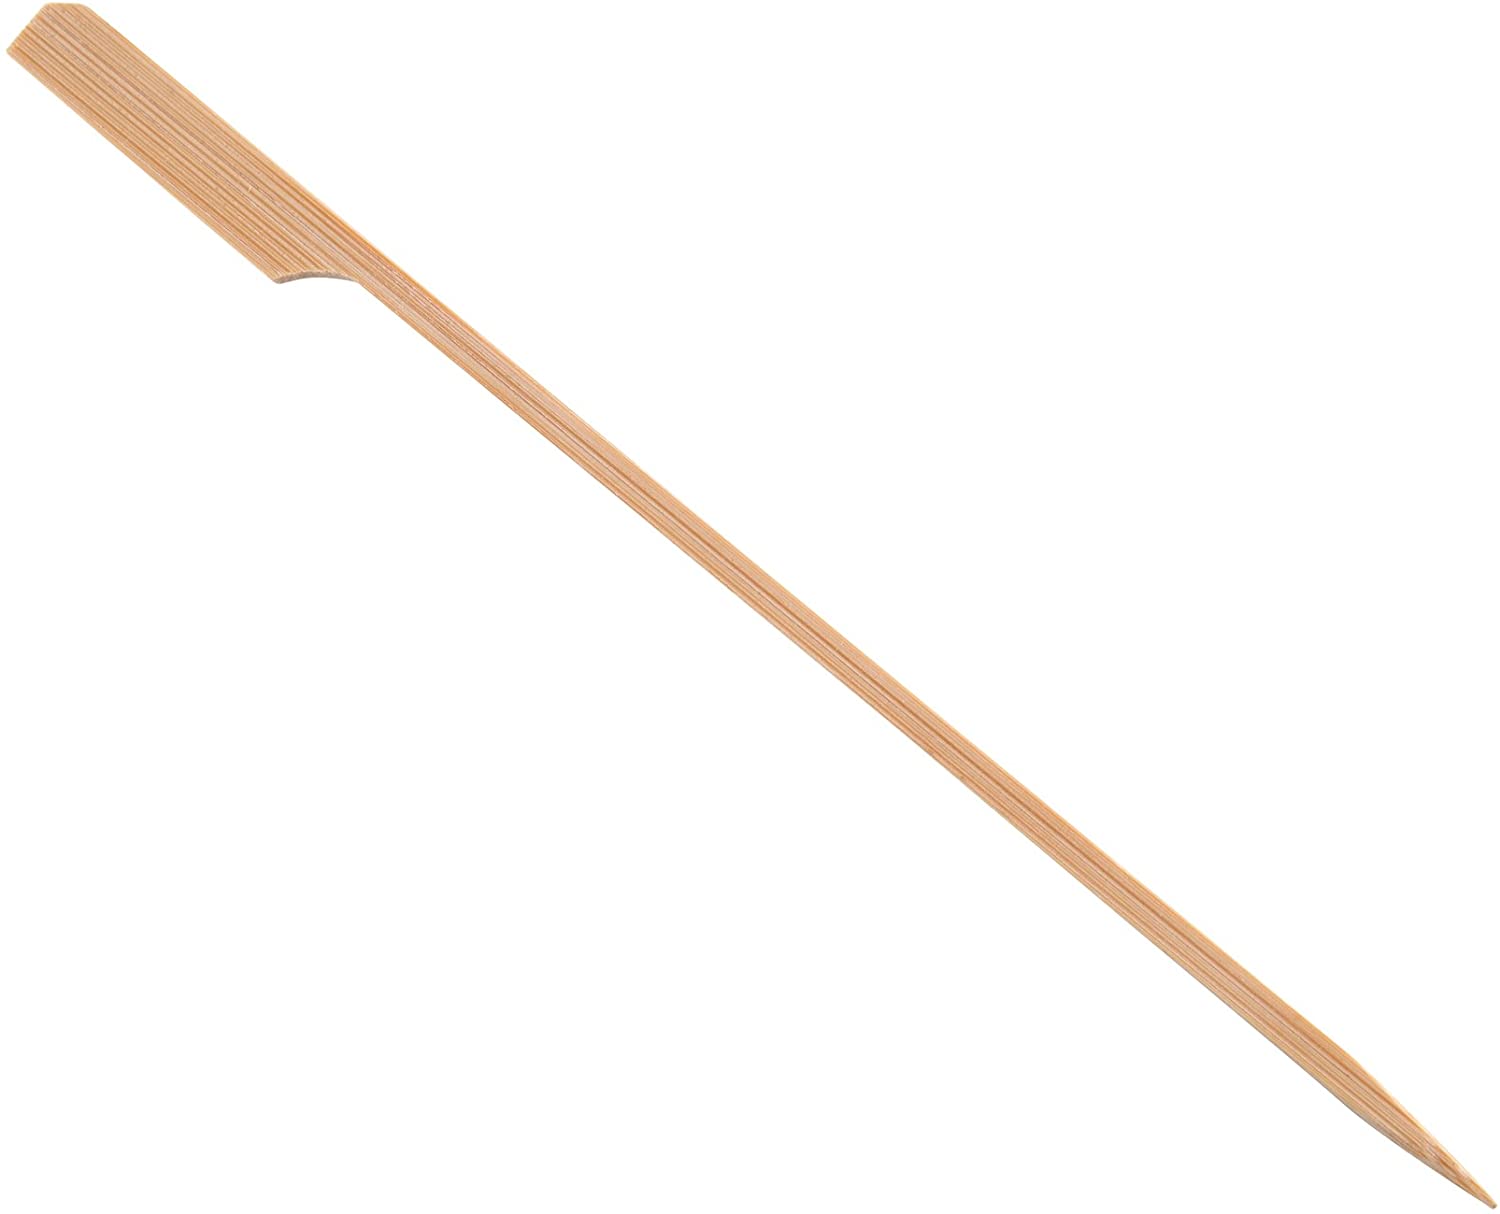 \'Axentia 124013 Bamboo Skewers Length Approximately 20 cm Wooden with Grip, Wood, brown, 20 x 0.5 x 1 cm, 50 Units